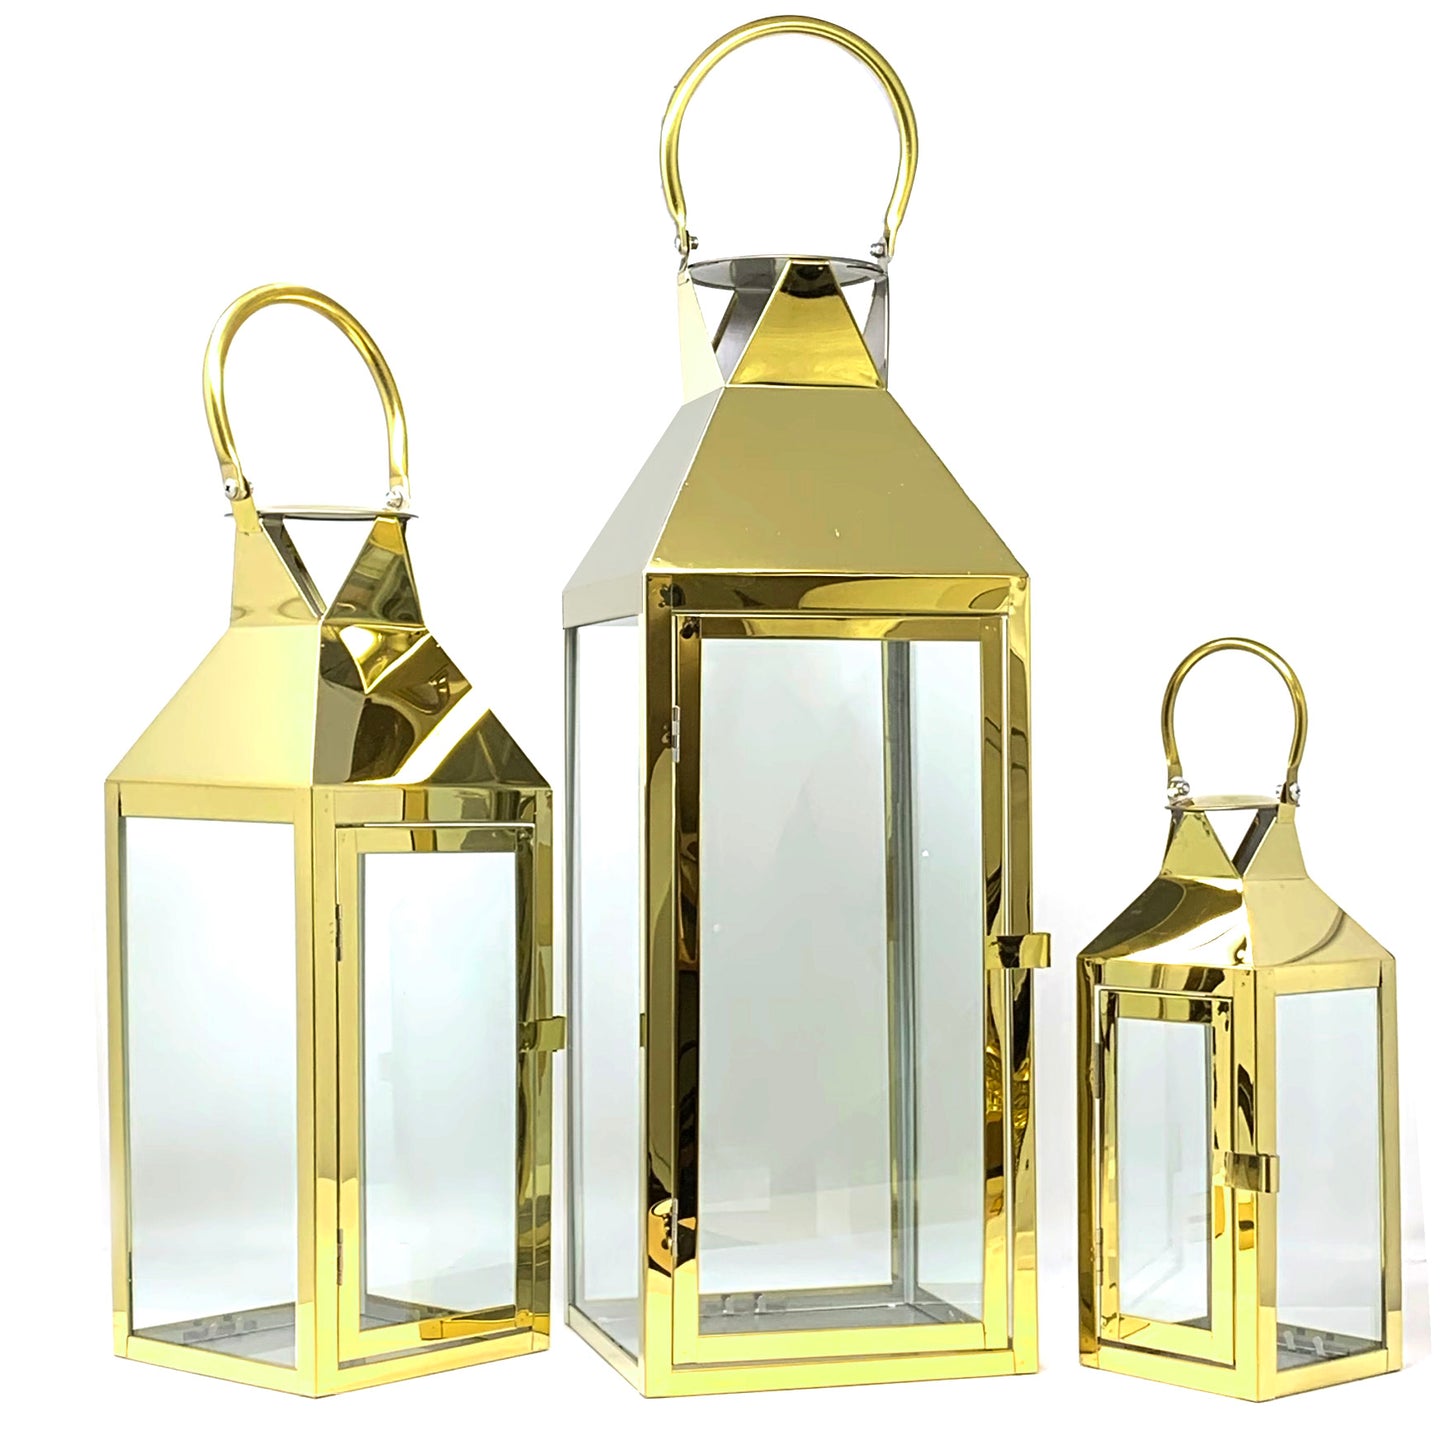 Allgala Lanterns 3-PC Set Jumbo Indoor/Outdoor Hurricane Candle Lantern Set with Chrome Plated Structure and Tempered Glass-Pyramid Top